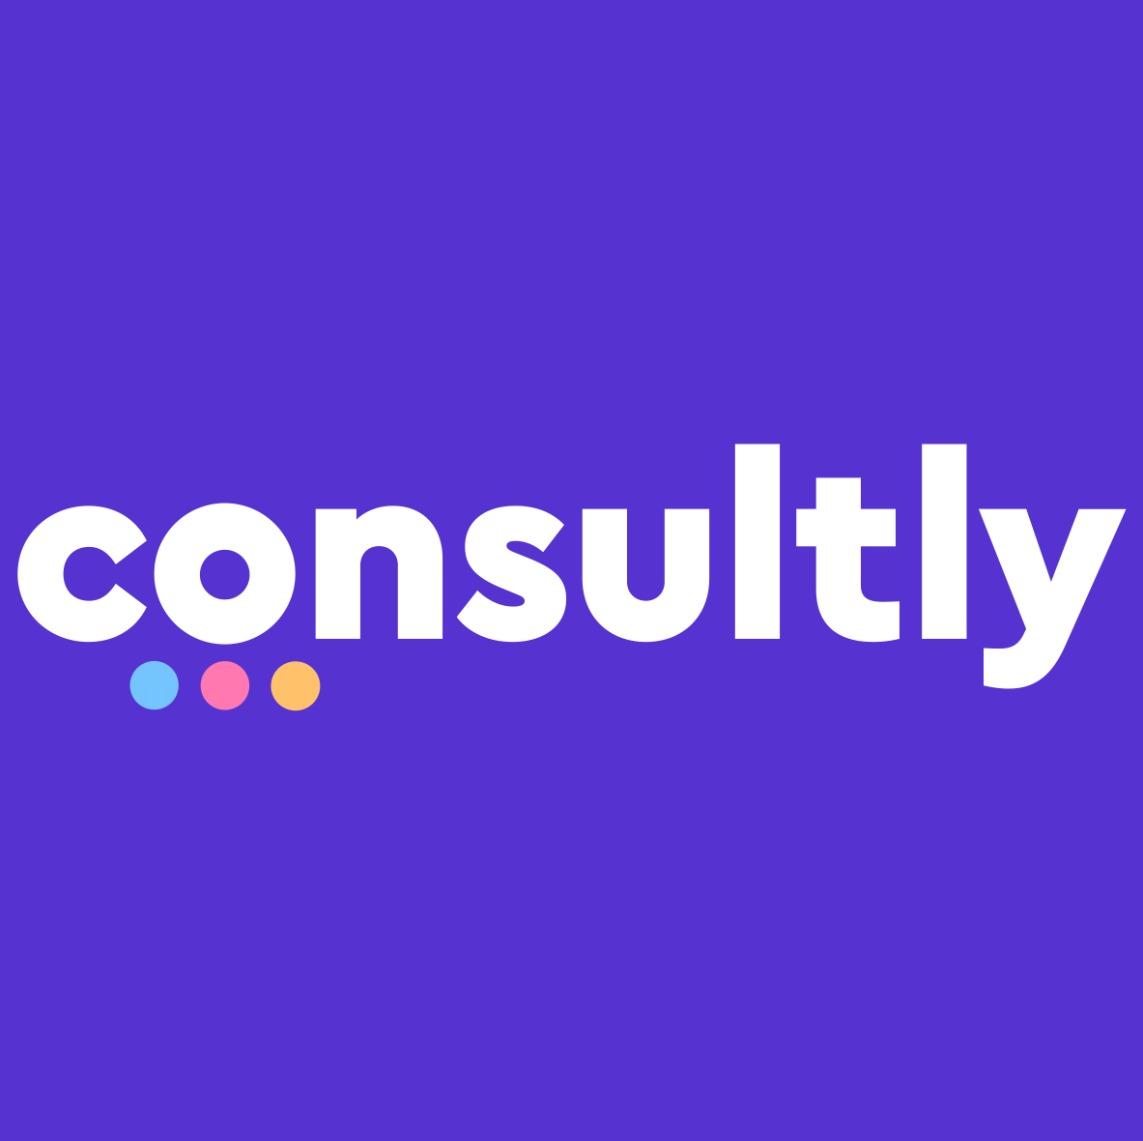 Consultly